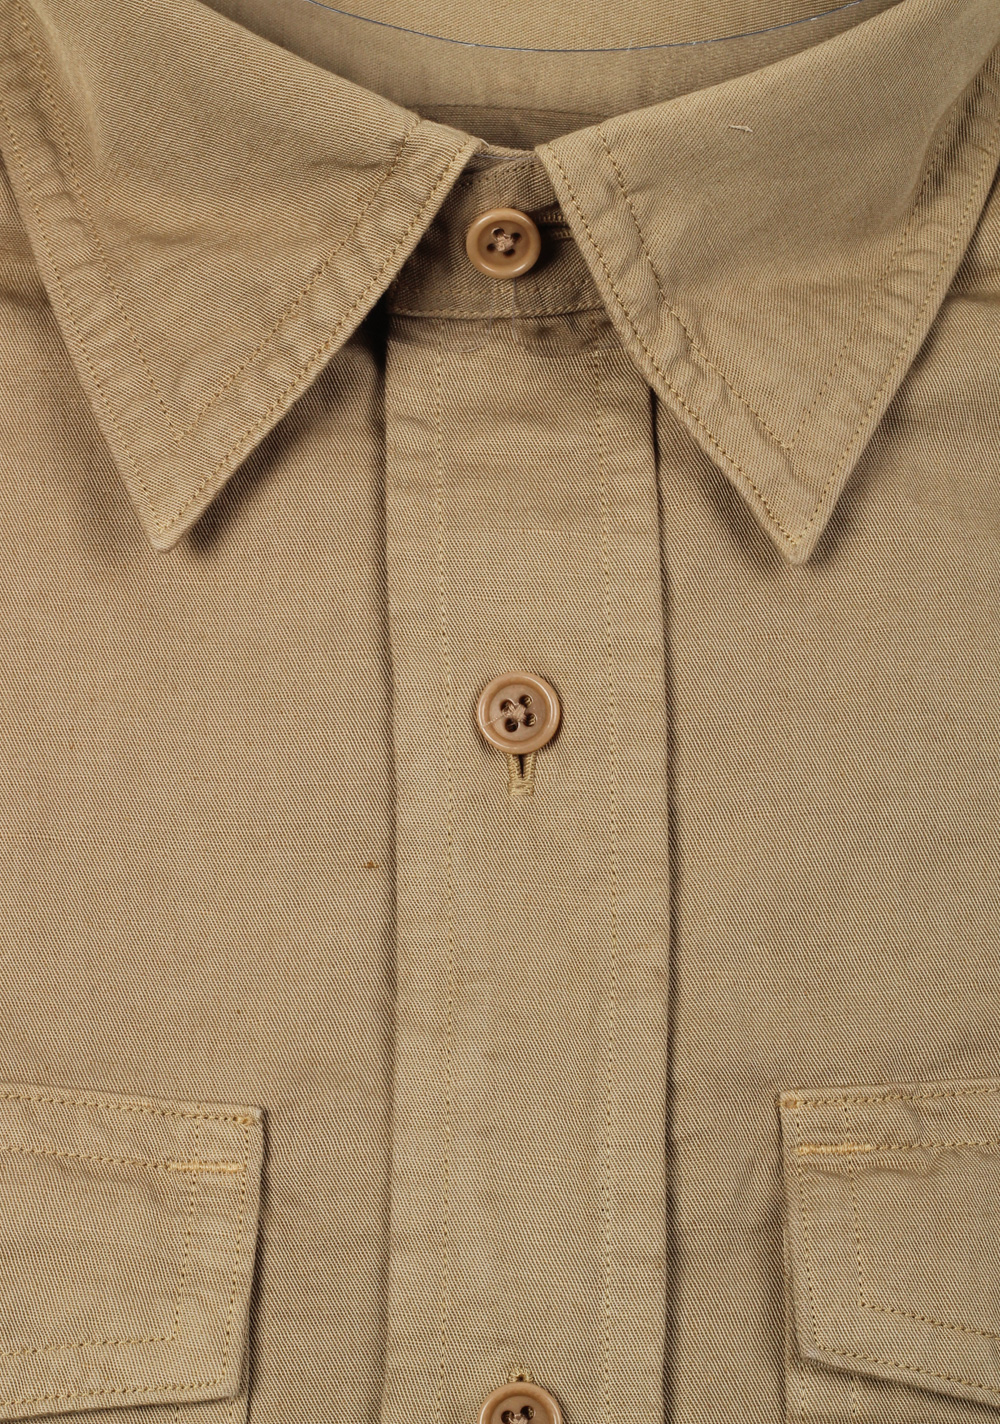 TOM FORD Solid Beige Casual Shirt Size 43 / 17 U.S. | Costume Limité